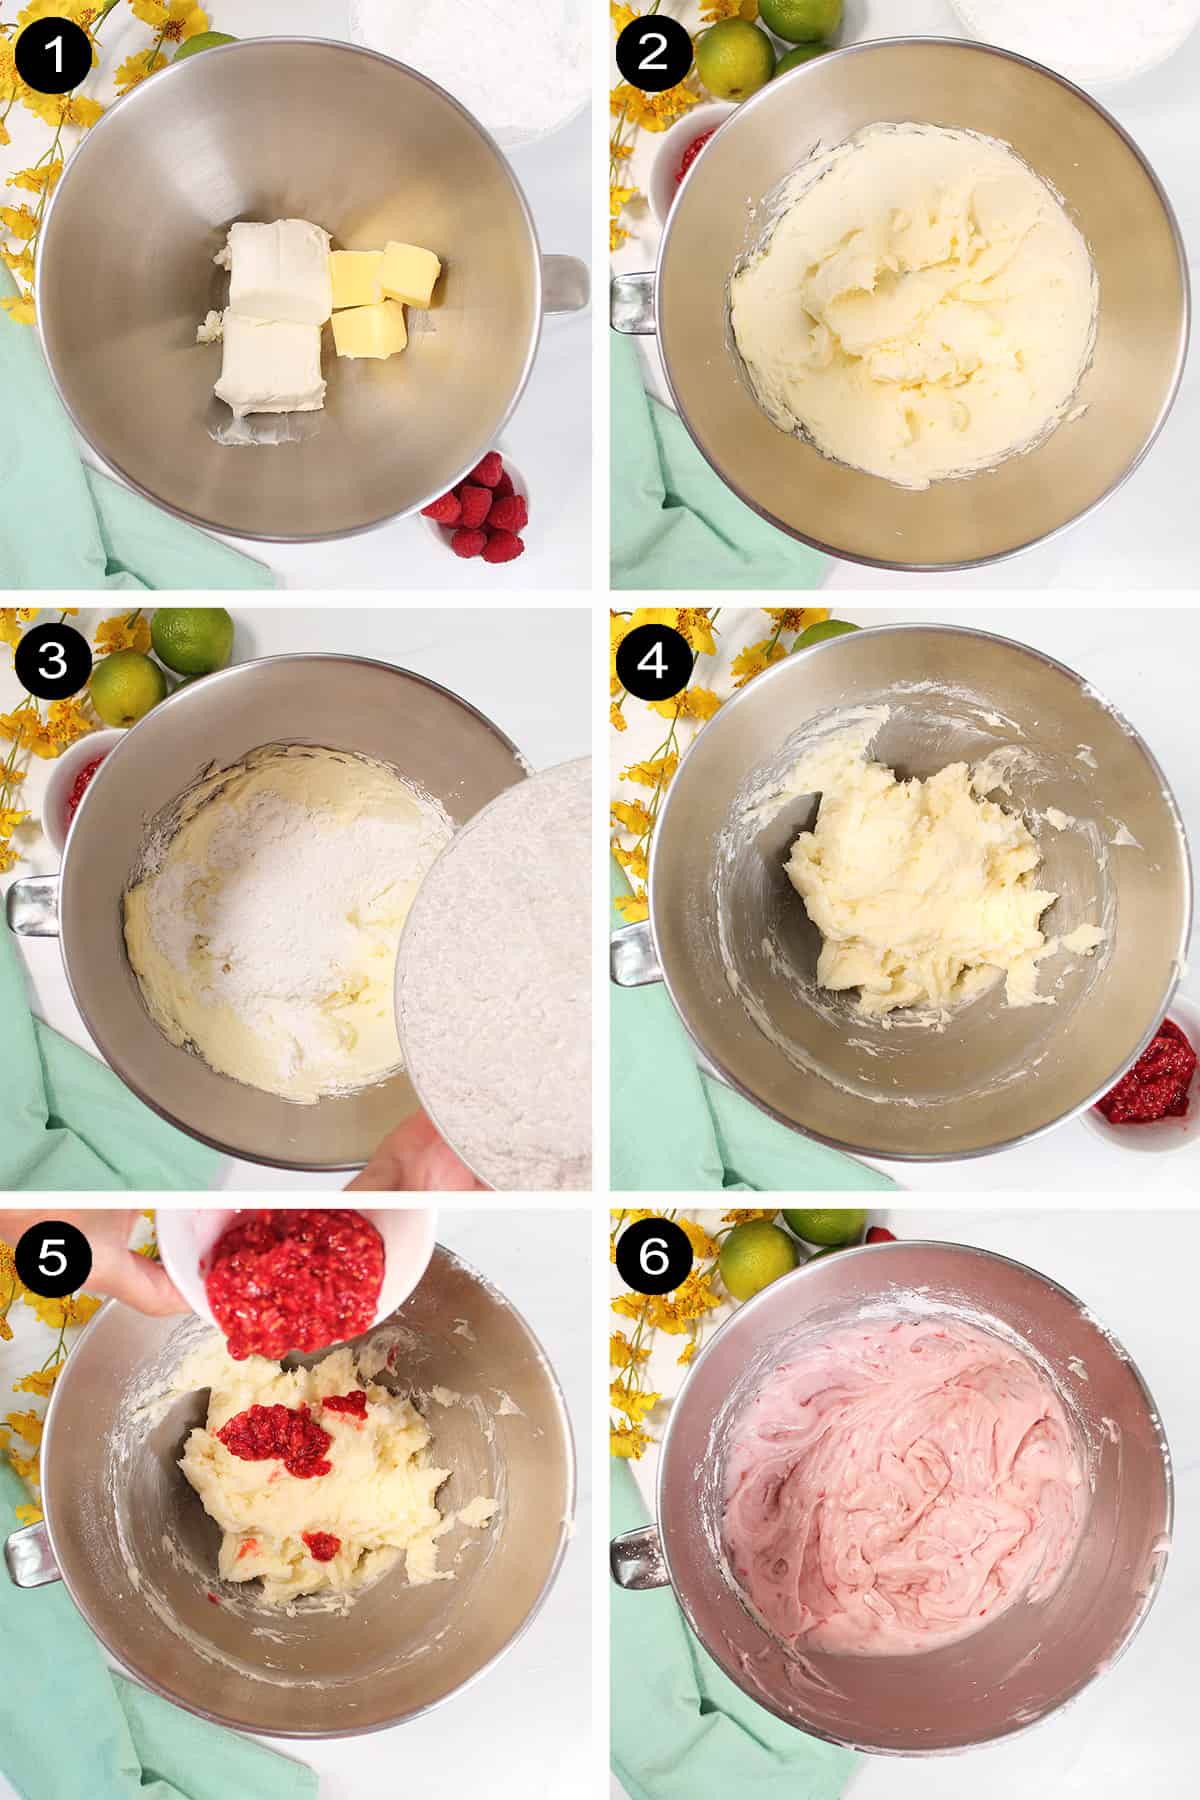 Steps to make raspberry cream cheese frosting.